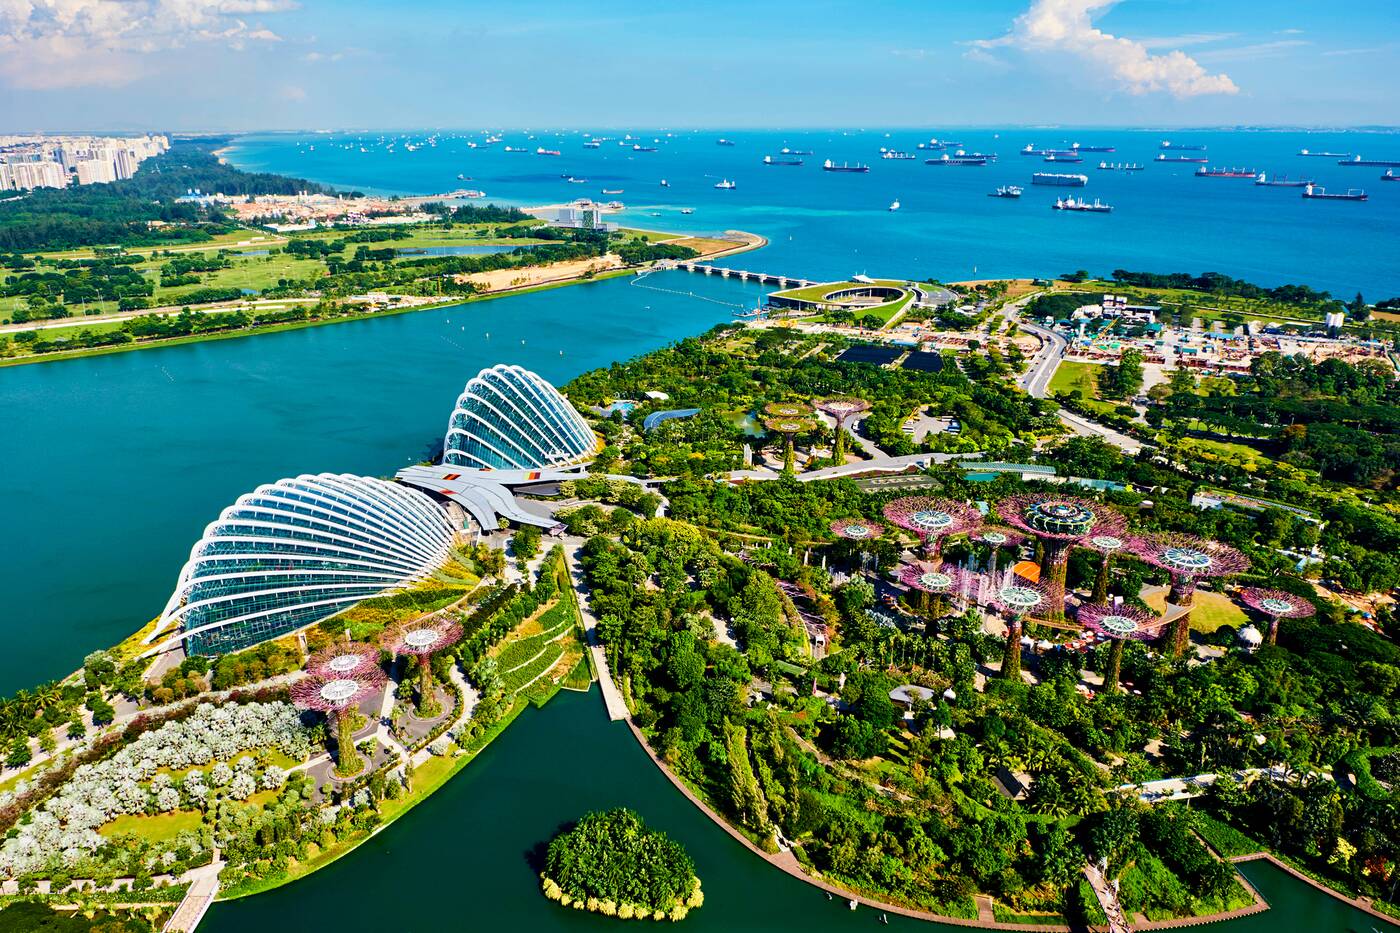 SkyPark Observation Deck, Attractions in Singapore